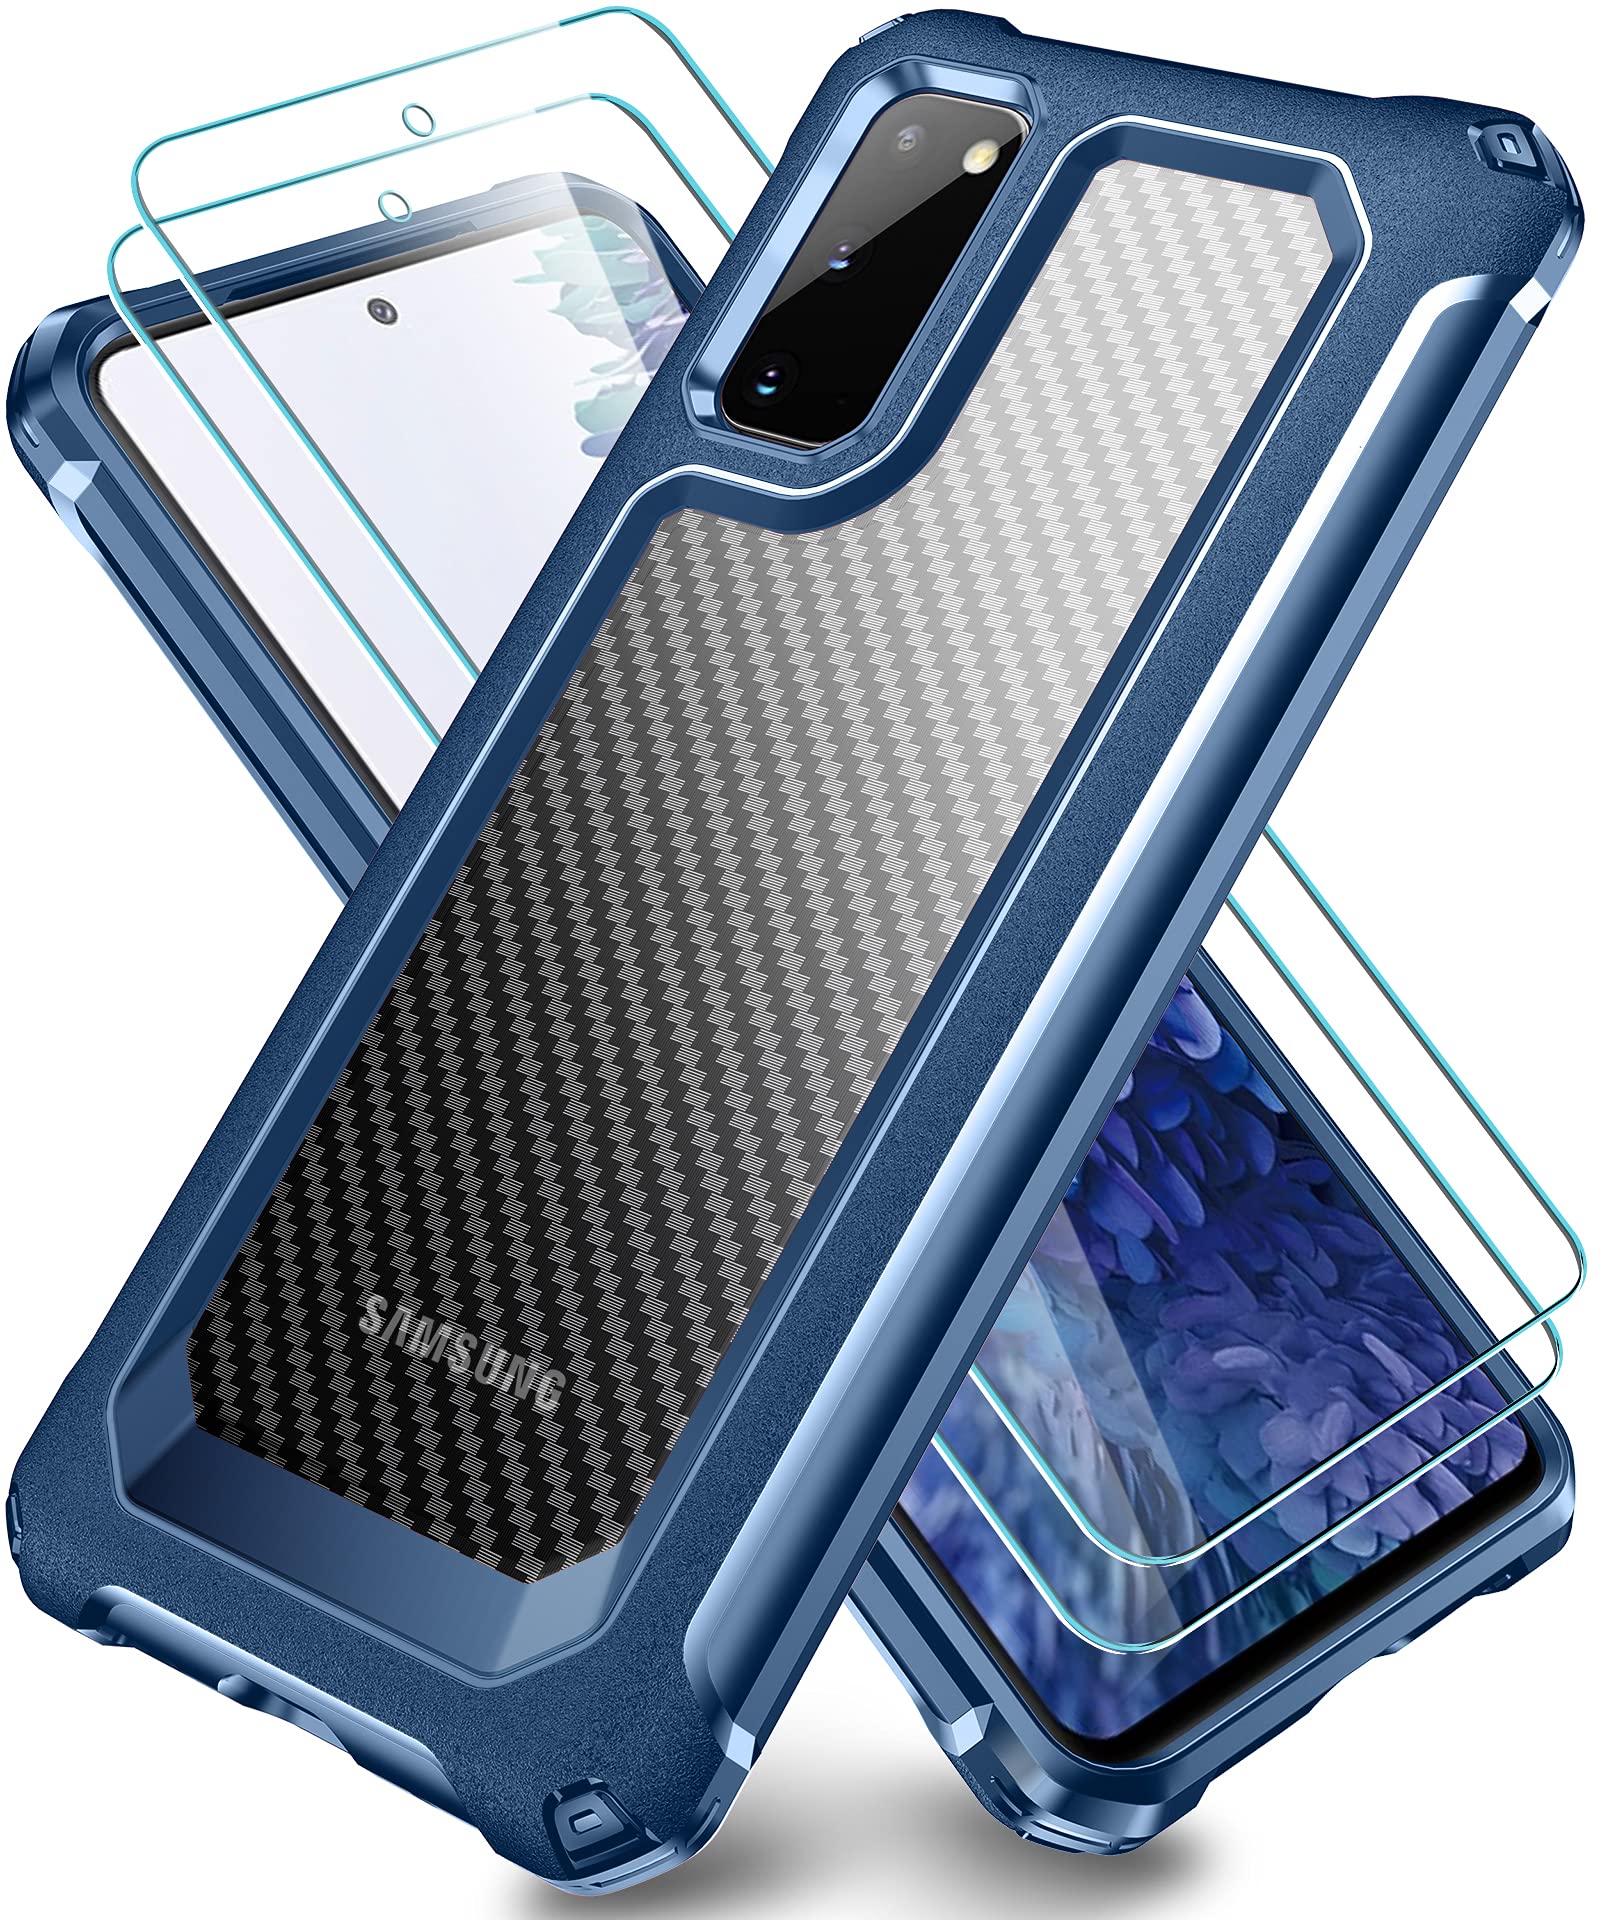 SUPBEC Galaxy S20 Case, Slim Carbon Fiber Shockproof Protective Cover with Screen Protector [x2] [Military Grade Drop Protection] [Anti Scratch&Fingerprint], Samsung S20 Case, 6.2